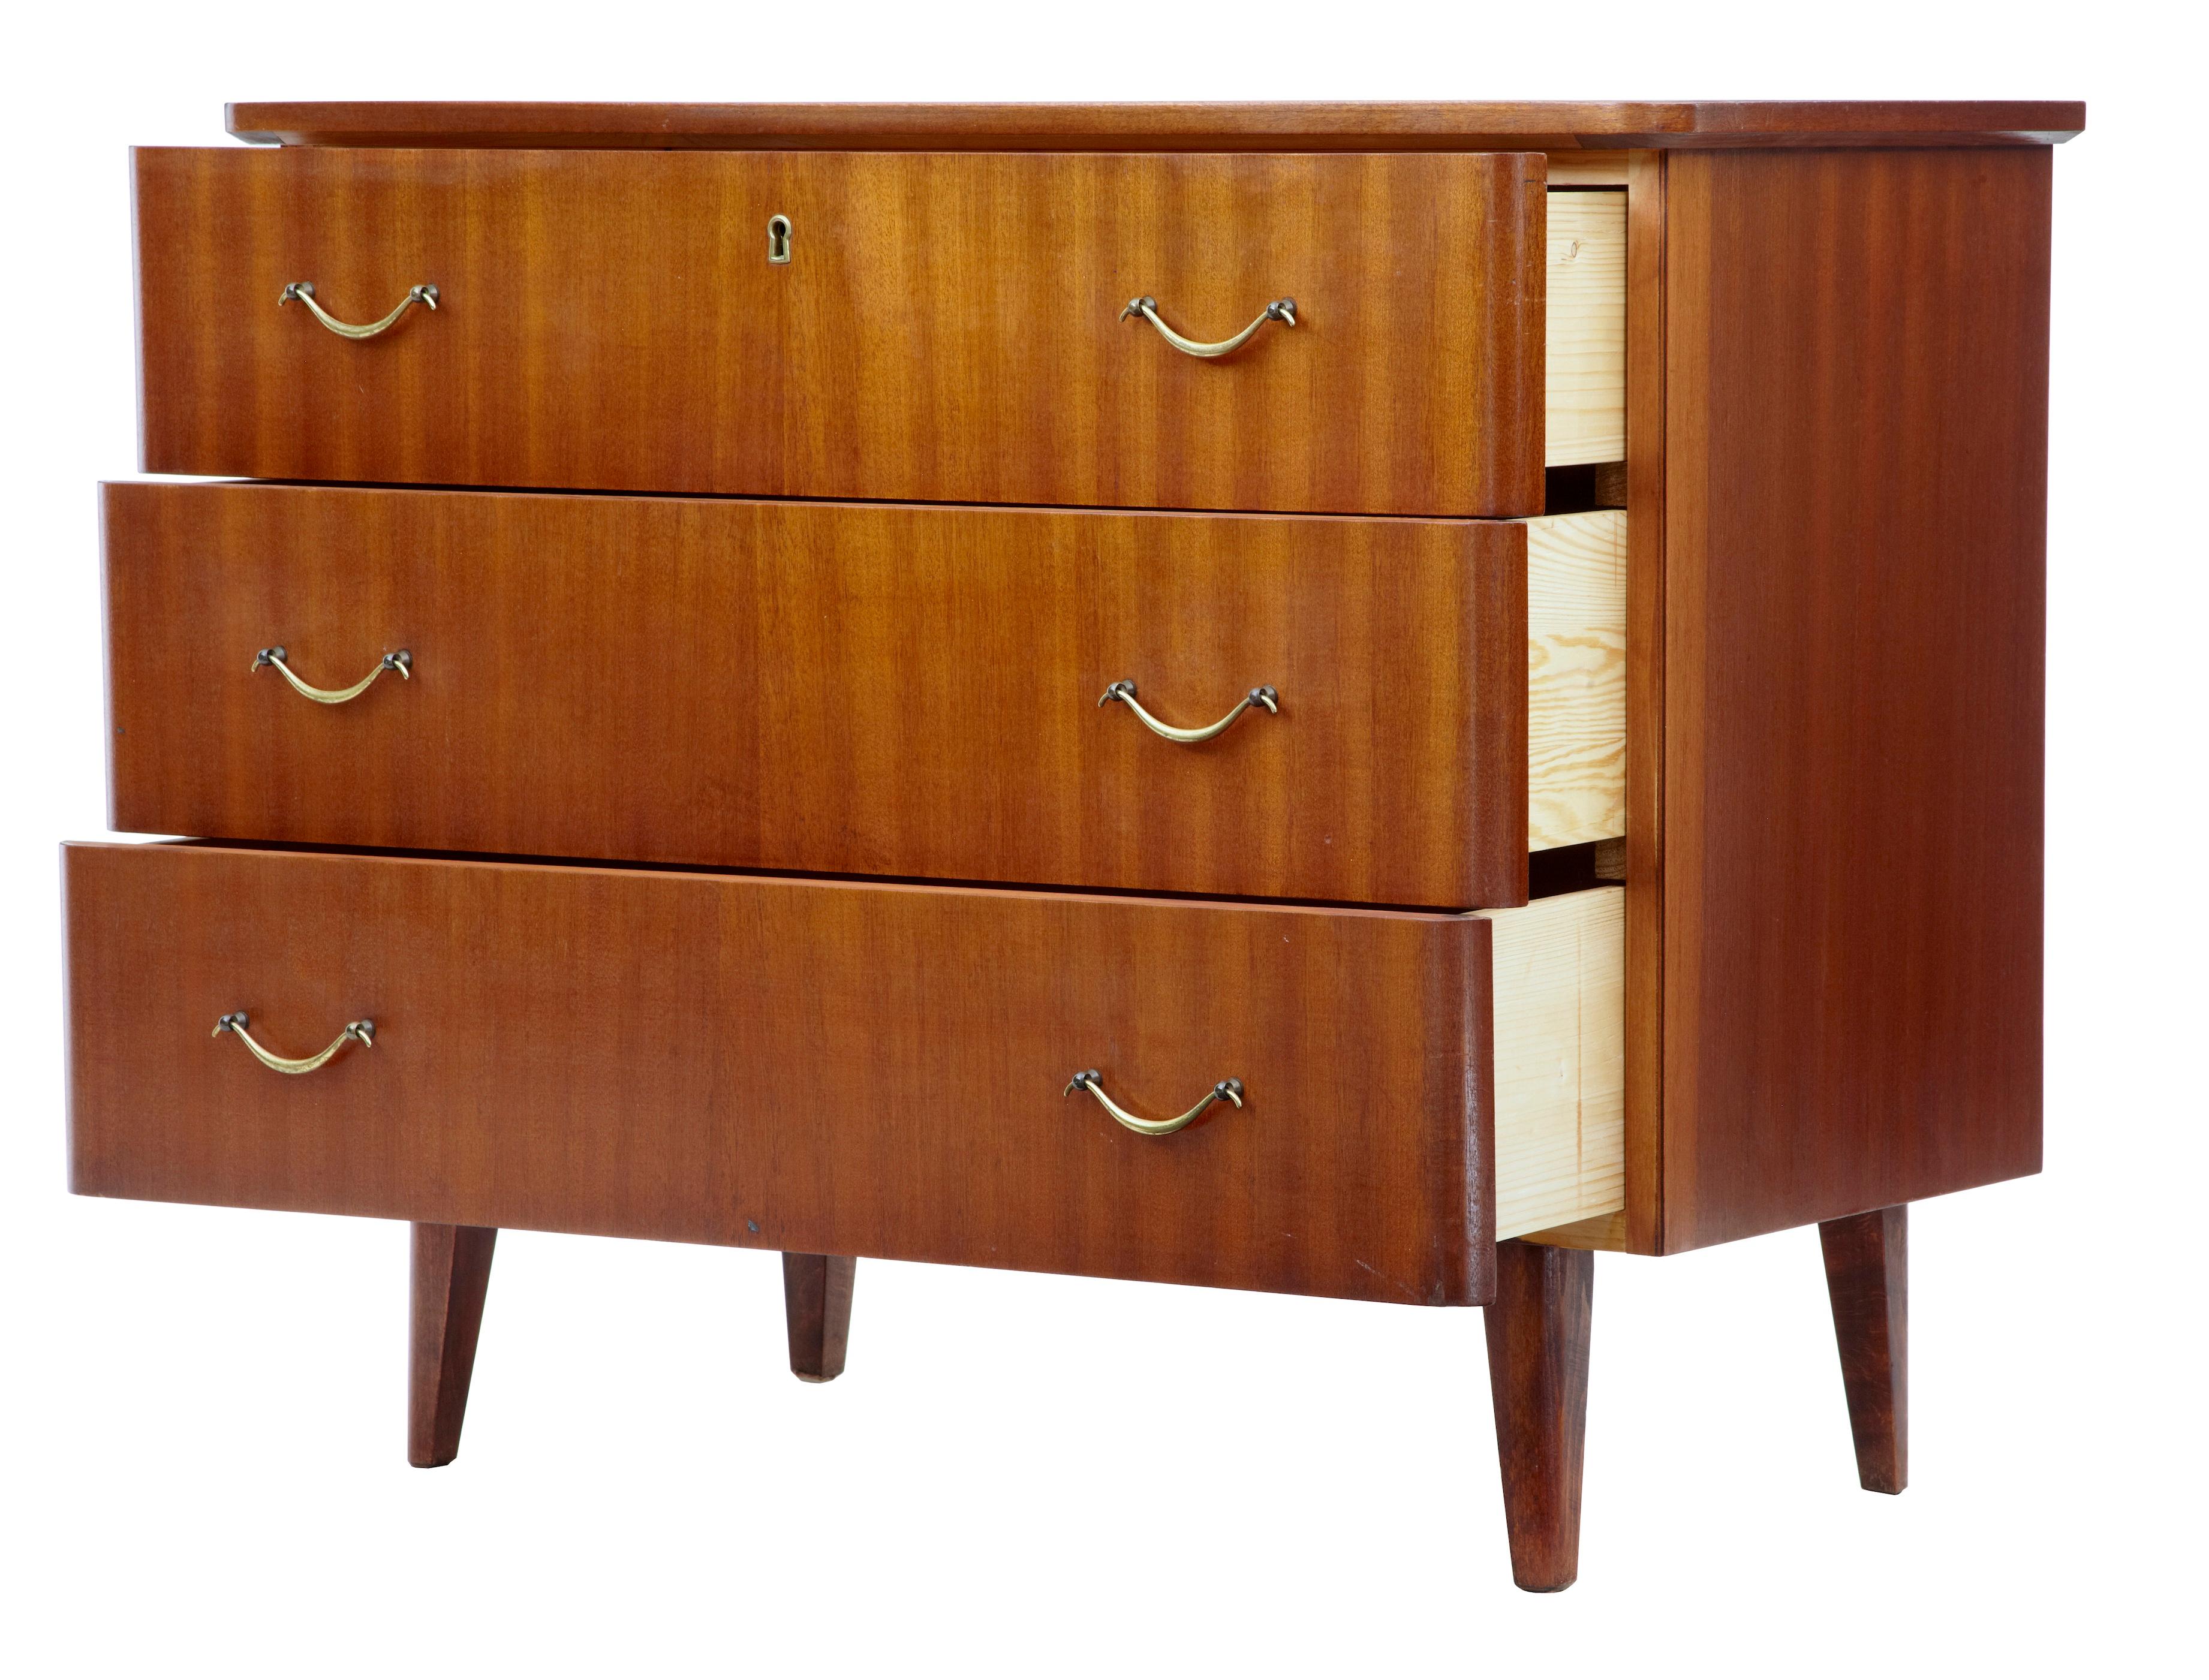 Hand-Crafted Mid-20th Century Danish Teak Chest of Drawers